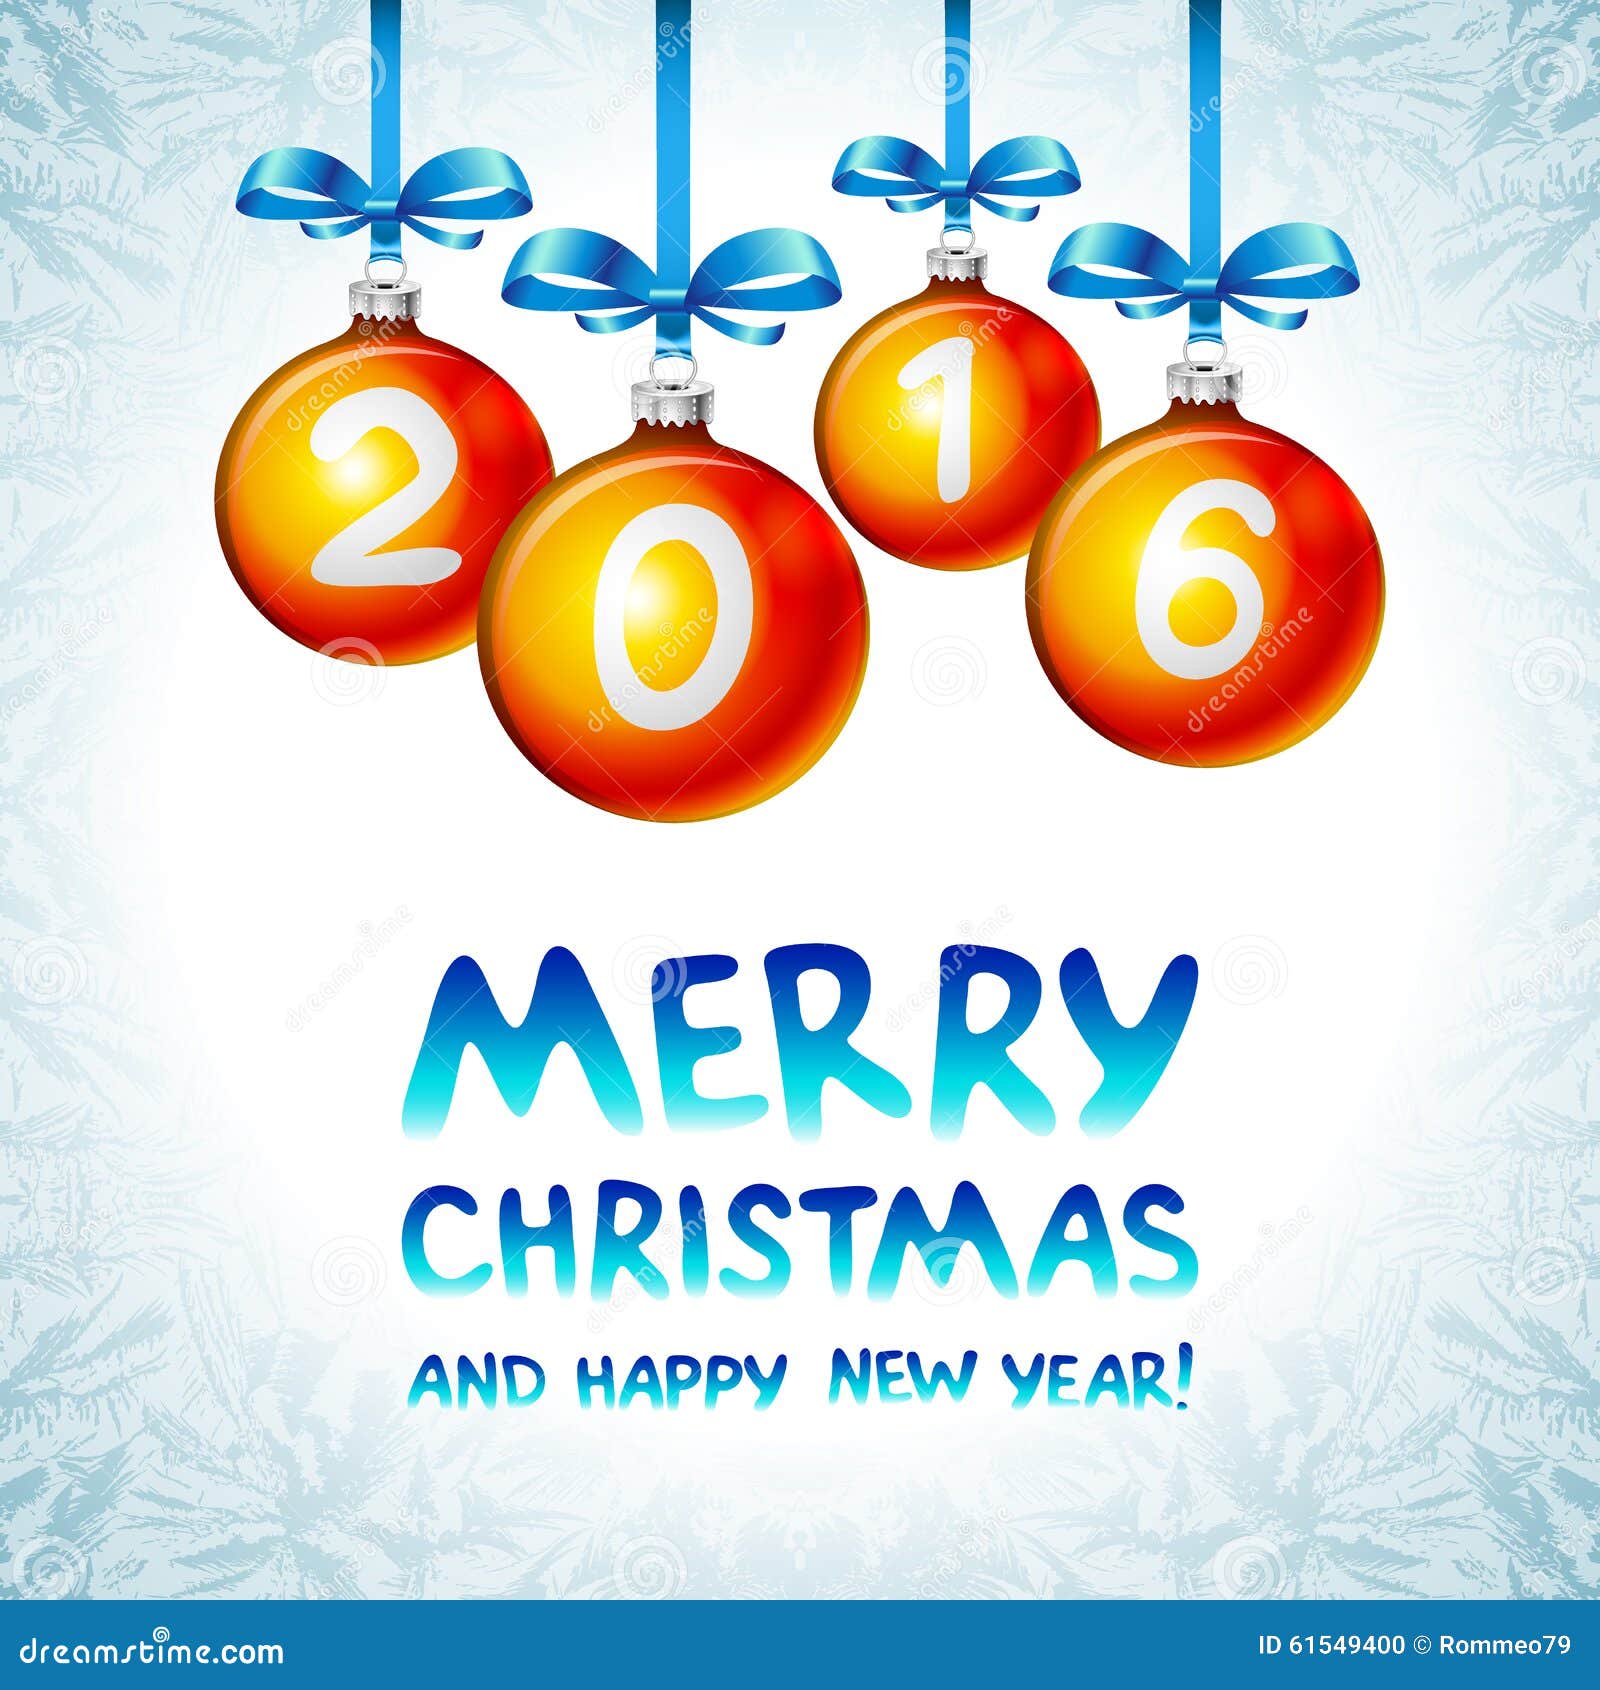 clipart merry christmas and happy new year - photo #31